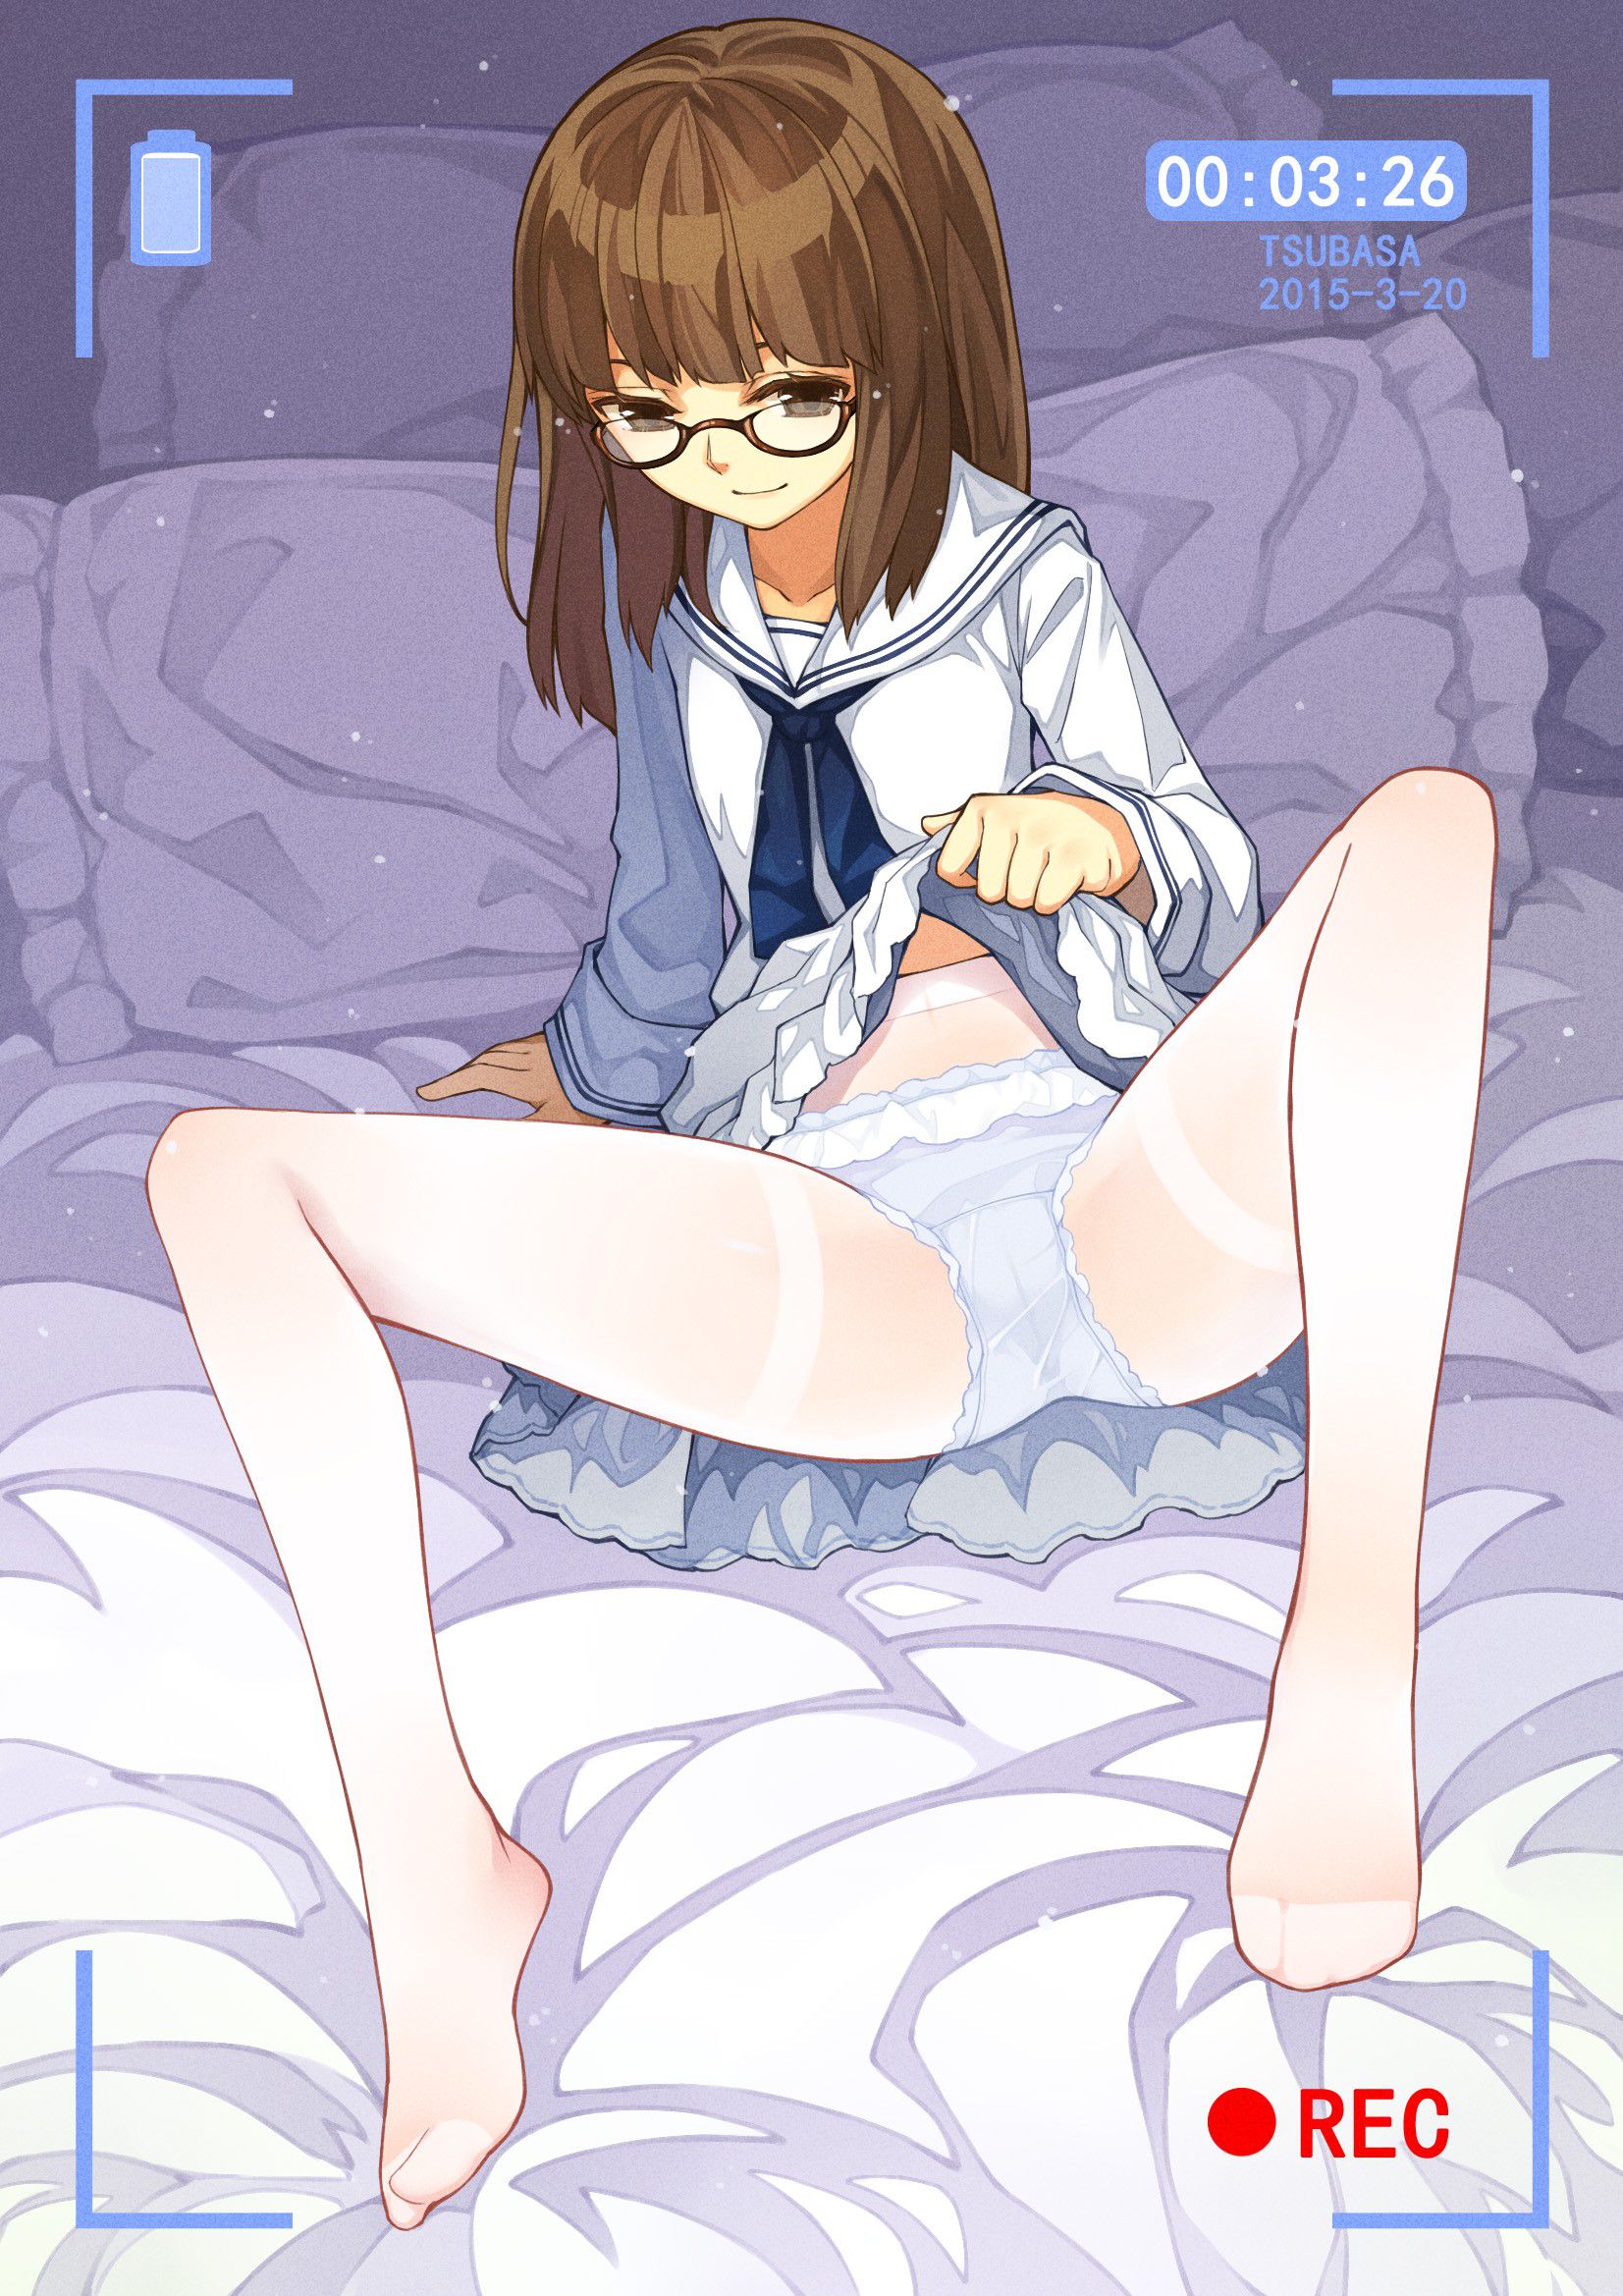 Secondary erotic erotic image of glasses girls who look intelligent and increase lewdness [30 sheets] 31